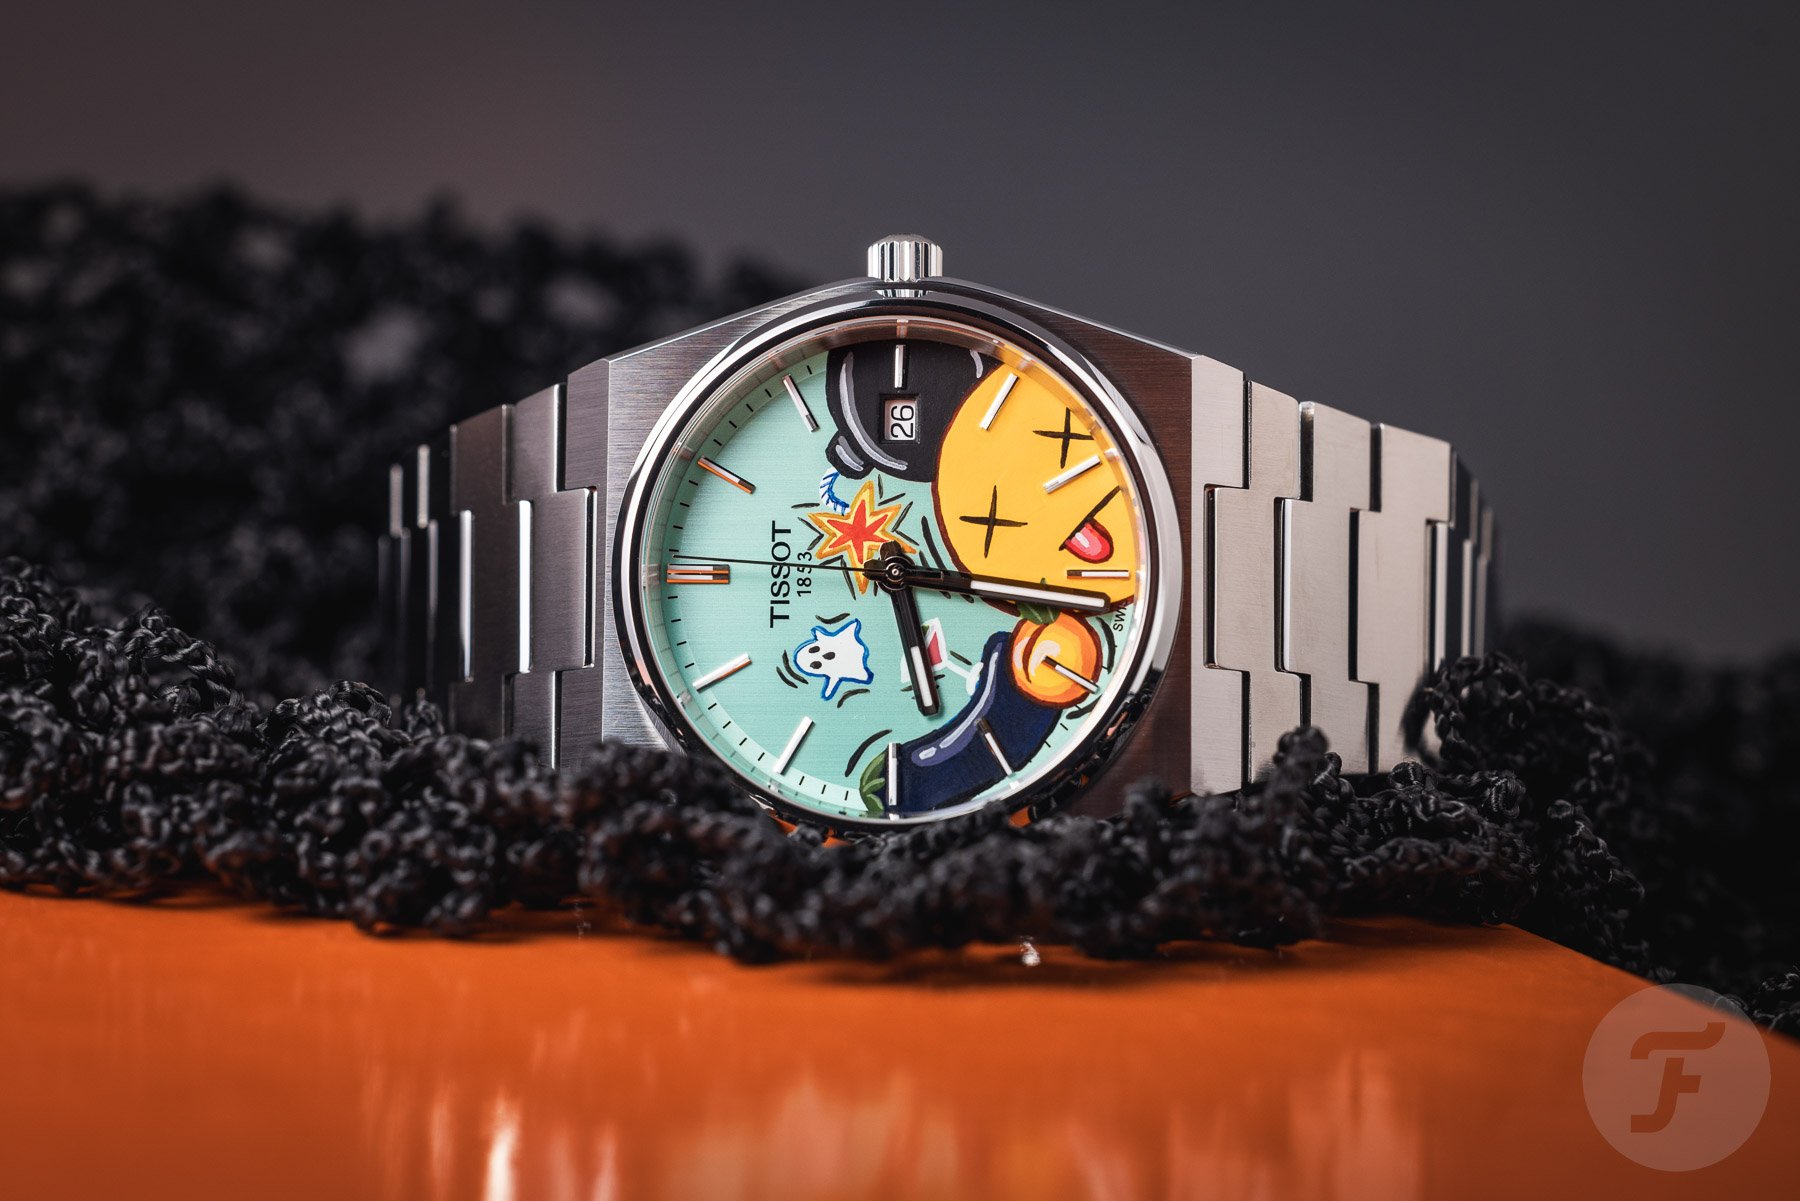 Introducing: The Whimsical IFL Watches Tissot PRX “Moji”